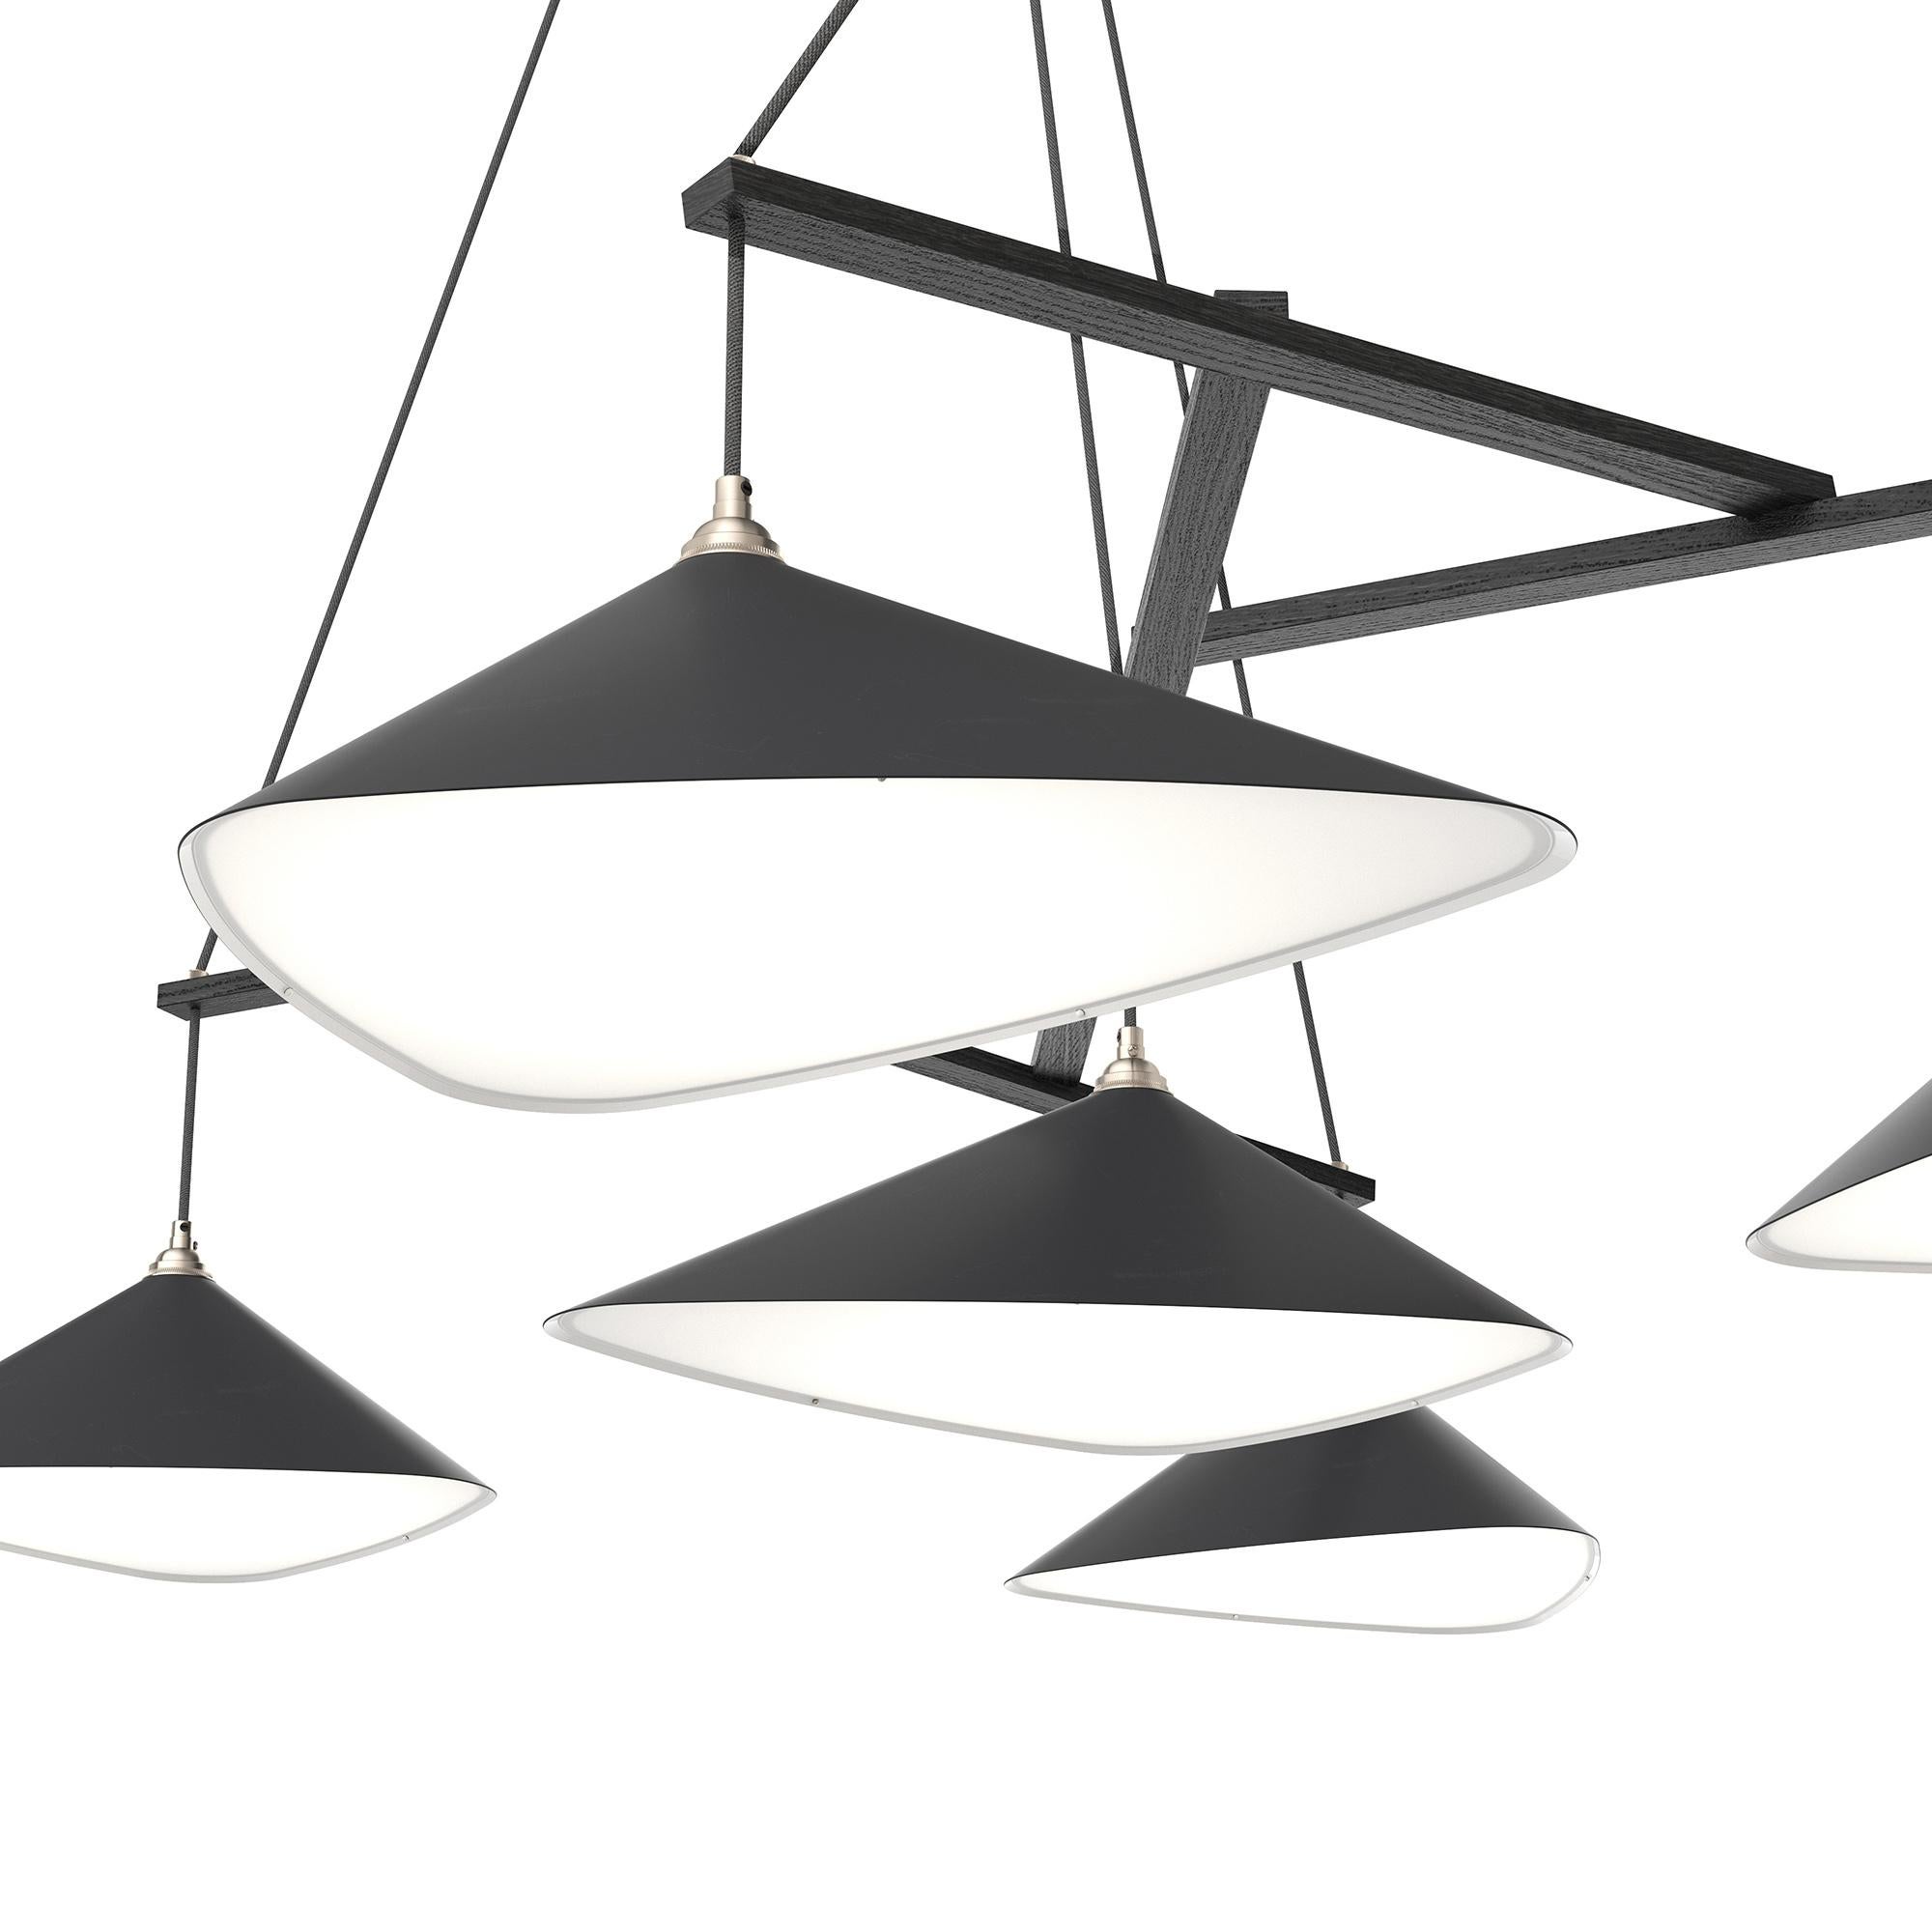 German Monumental Daniel Becker 'Emily 13' Chandelier in Anthracite for Moss Objects For Sale